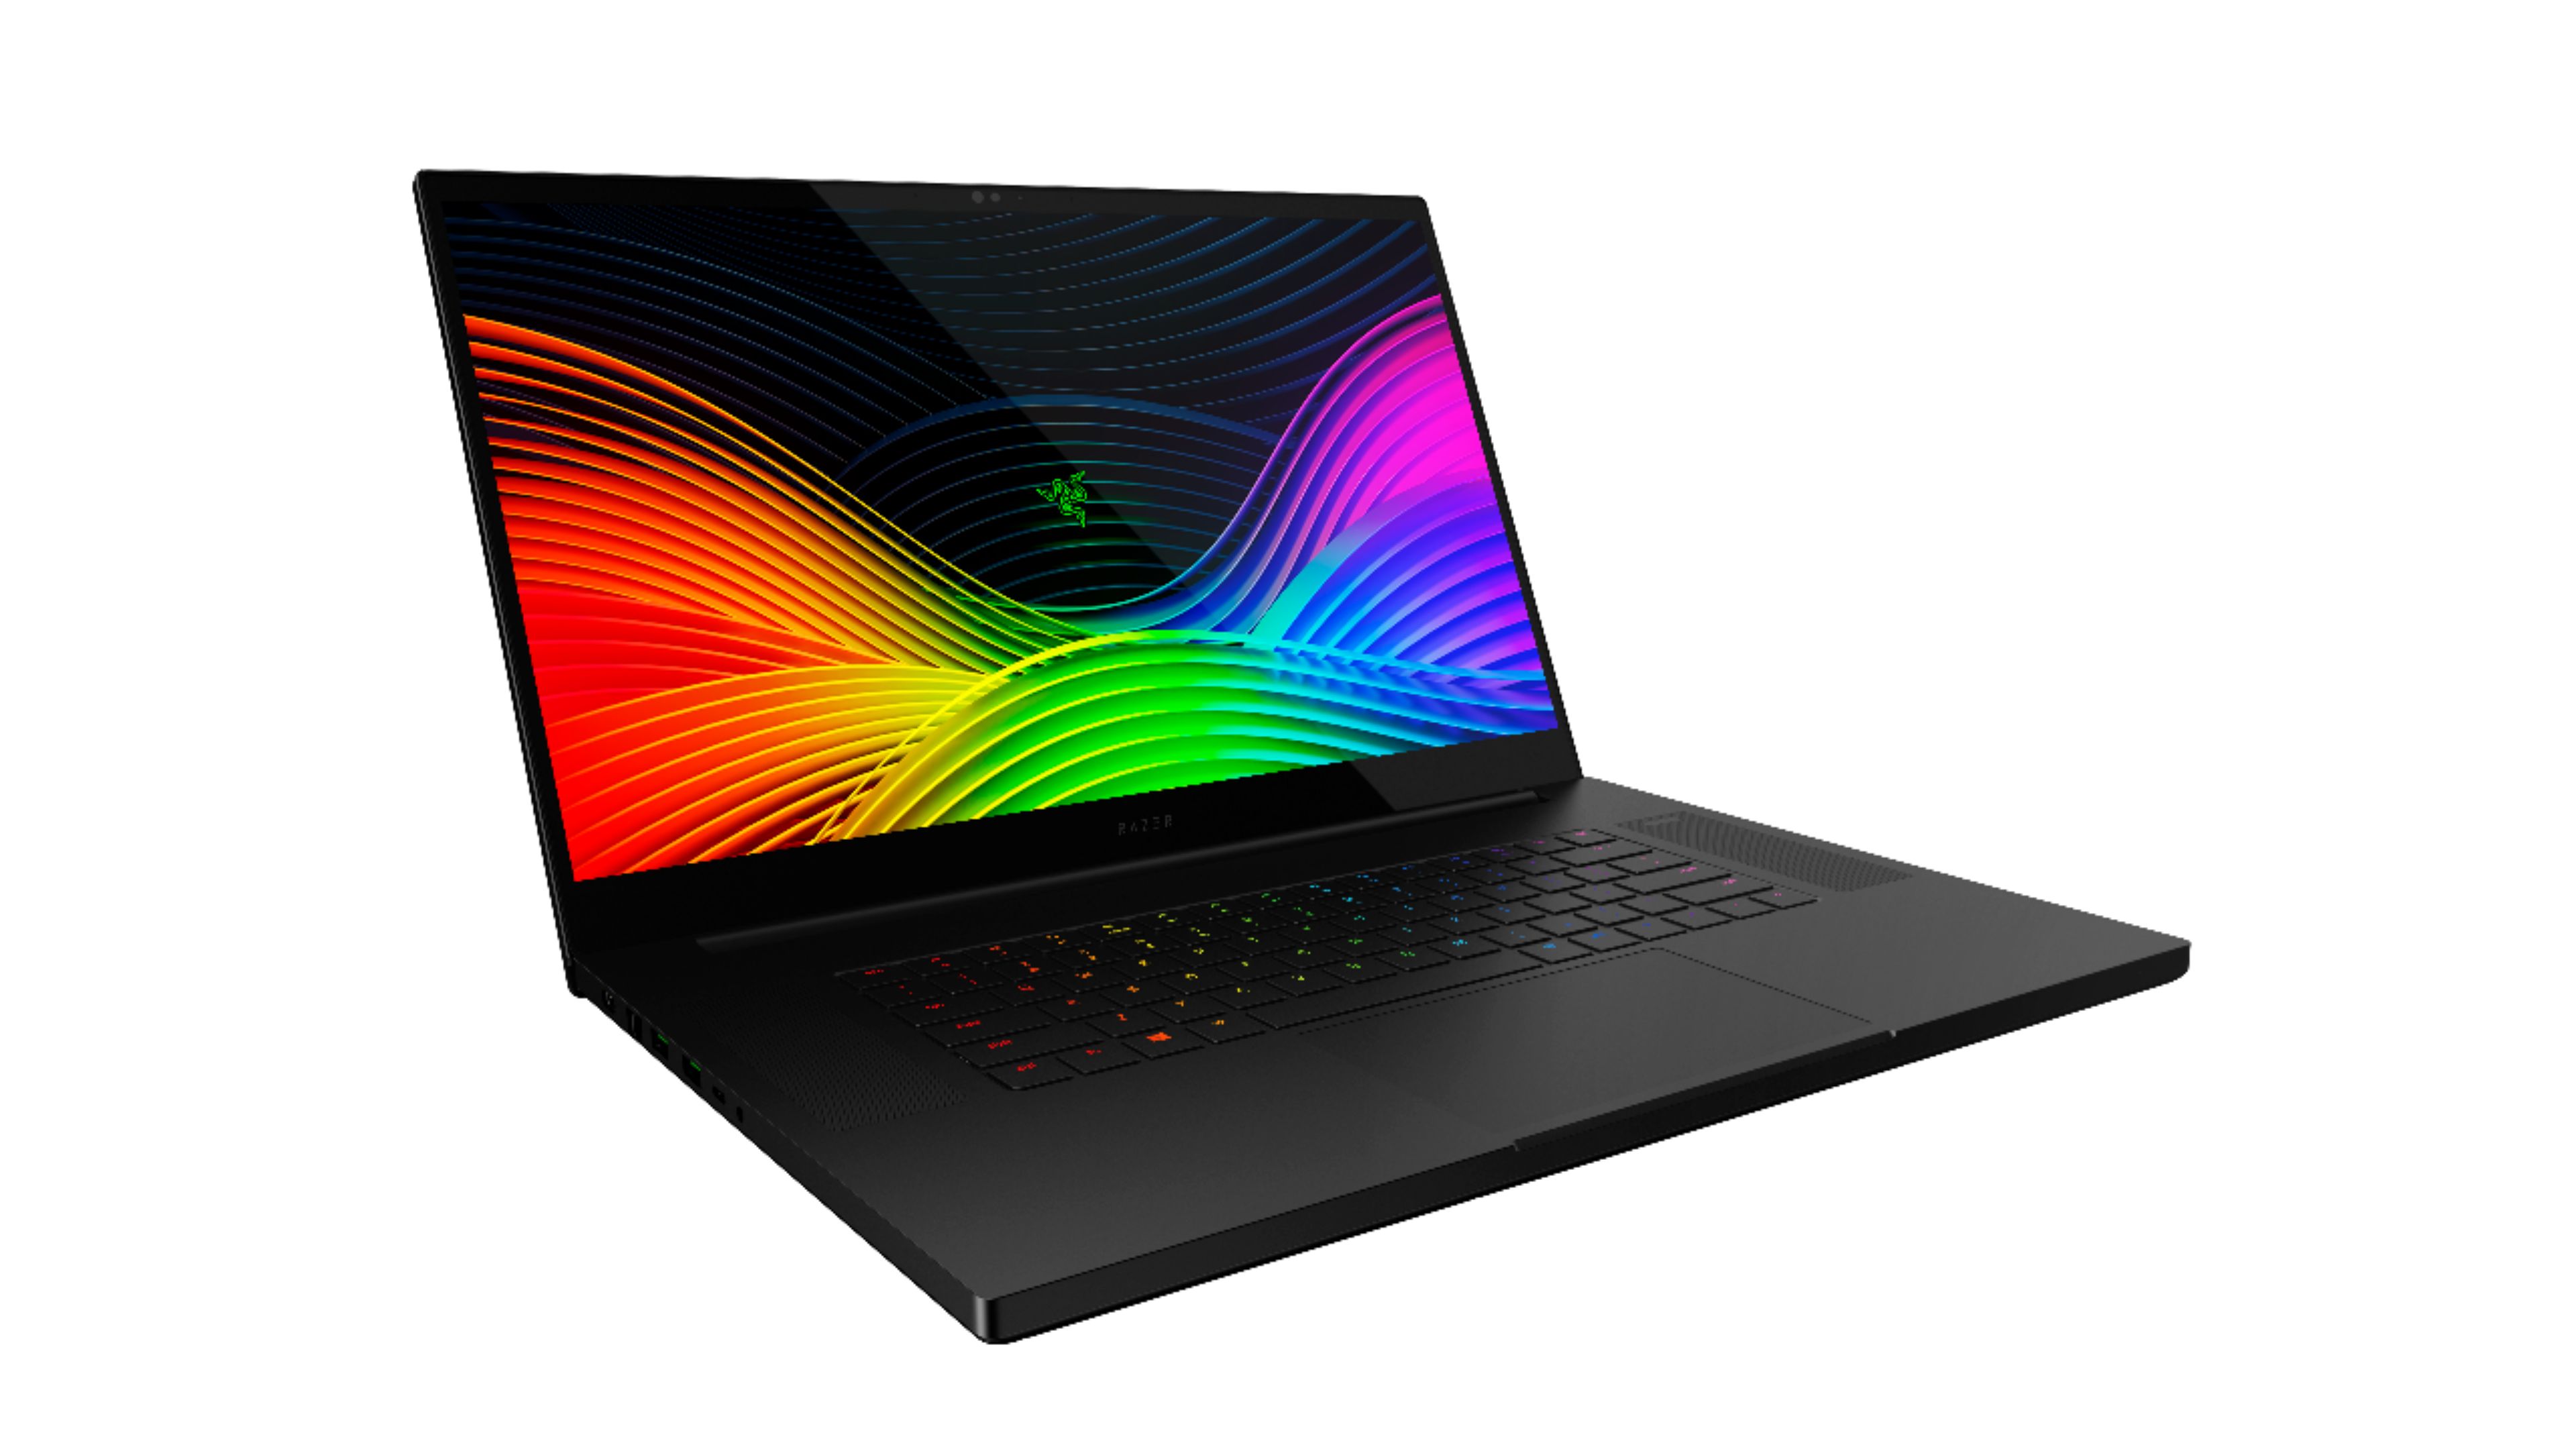 Angle View: Razer - Geek Squad Certified Refurbished 17.3" 4K Touch-Screen Gaming Laptop - Core i7 - 16GB - GeForce RTX 2080 - 512GB SSD - Matte Black